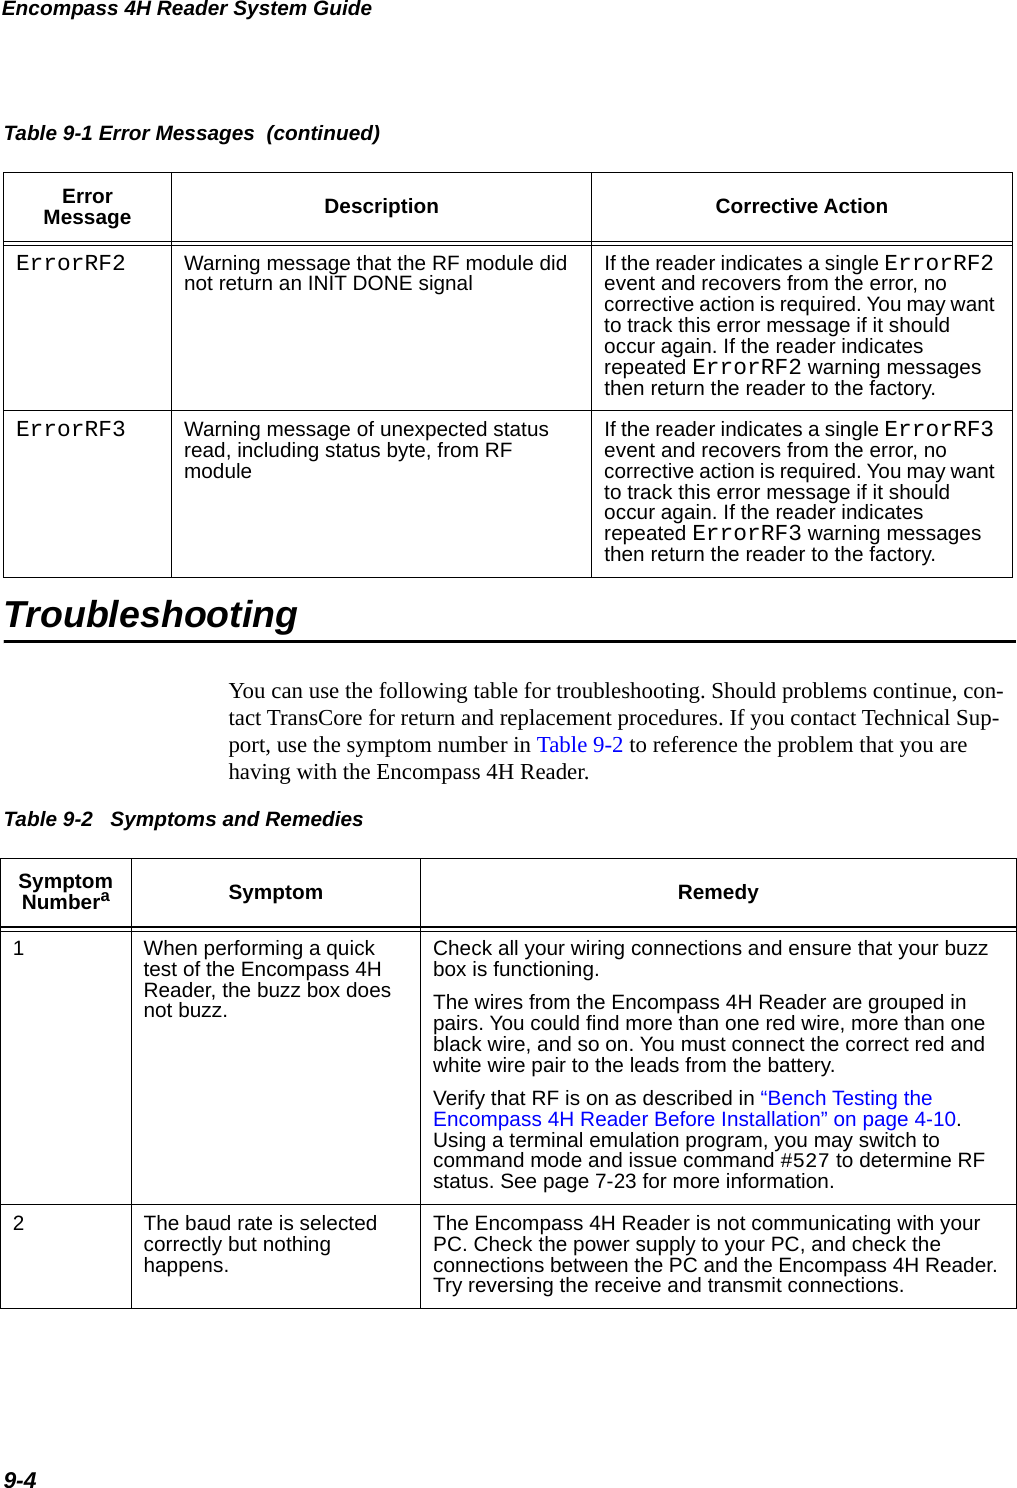 Encompass 4H Reader System Guide9-4TroubleshootingYou can use the following table for troubleshooting. Should problems continue, con-tact TransCore for return and replacement procedures. If you contact Technical Sup-port, use the symptom number in Table 9-2 to reference the problem that you are having with the Encompass 4H Reader. ErrorRF2 Warning message that the RF module did not return an INIT DONE signal If the reader indicates a single ErrorRF2 event and recovers from the error, no corrective action is required. You may want to track this error message if it should occur again. If the reader indicates repeated ErrorRF2 warning messages then return the reader to the factory.ErrorRF3 Warning message of unexpected status read, including status byte, from RF moduleIf the reader indicates a single ErrorRF3 event and recovers from the error, no corrective action is required. You may want to track this error message if it should occur again. If the reader indicates repeated ErrorRF3 warning messages then return the reader to the factory.Table 9-1 Error Messages  (continued)Error Message Description Corrective ActionTable 9-2   Symptoms and Remedies Symptom NumberaSymptom Remedy1When performing a quick test of the Encompass 4H Reader, the buzz box does not buzz.Check all your wiring connections and ensure that your buzz box is functioning. The wires from the Encompass 4H Reader are grouped in pairs. You could find more than one red wire, more than one black wire, and so on. You must connect the correct red and white wire pair to the leads from the battery. Verify that RF is on as described in “Bench Testing the Encompass 4H Reader Before Installation” on page 4-10. Using a terminal emulation program, you may switch to command mode and issue command #527 to determine RF status. See page 7-23 for more information.2The baud rate is selected correctly but nothing happens.The Encompass 4H Reader is not communicating with your PC. Check the power supply to your PC, and check the connections between the PC and the Encompass 4H Reader. Try reversing the receive and transmit connections.